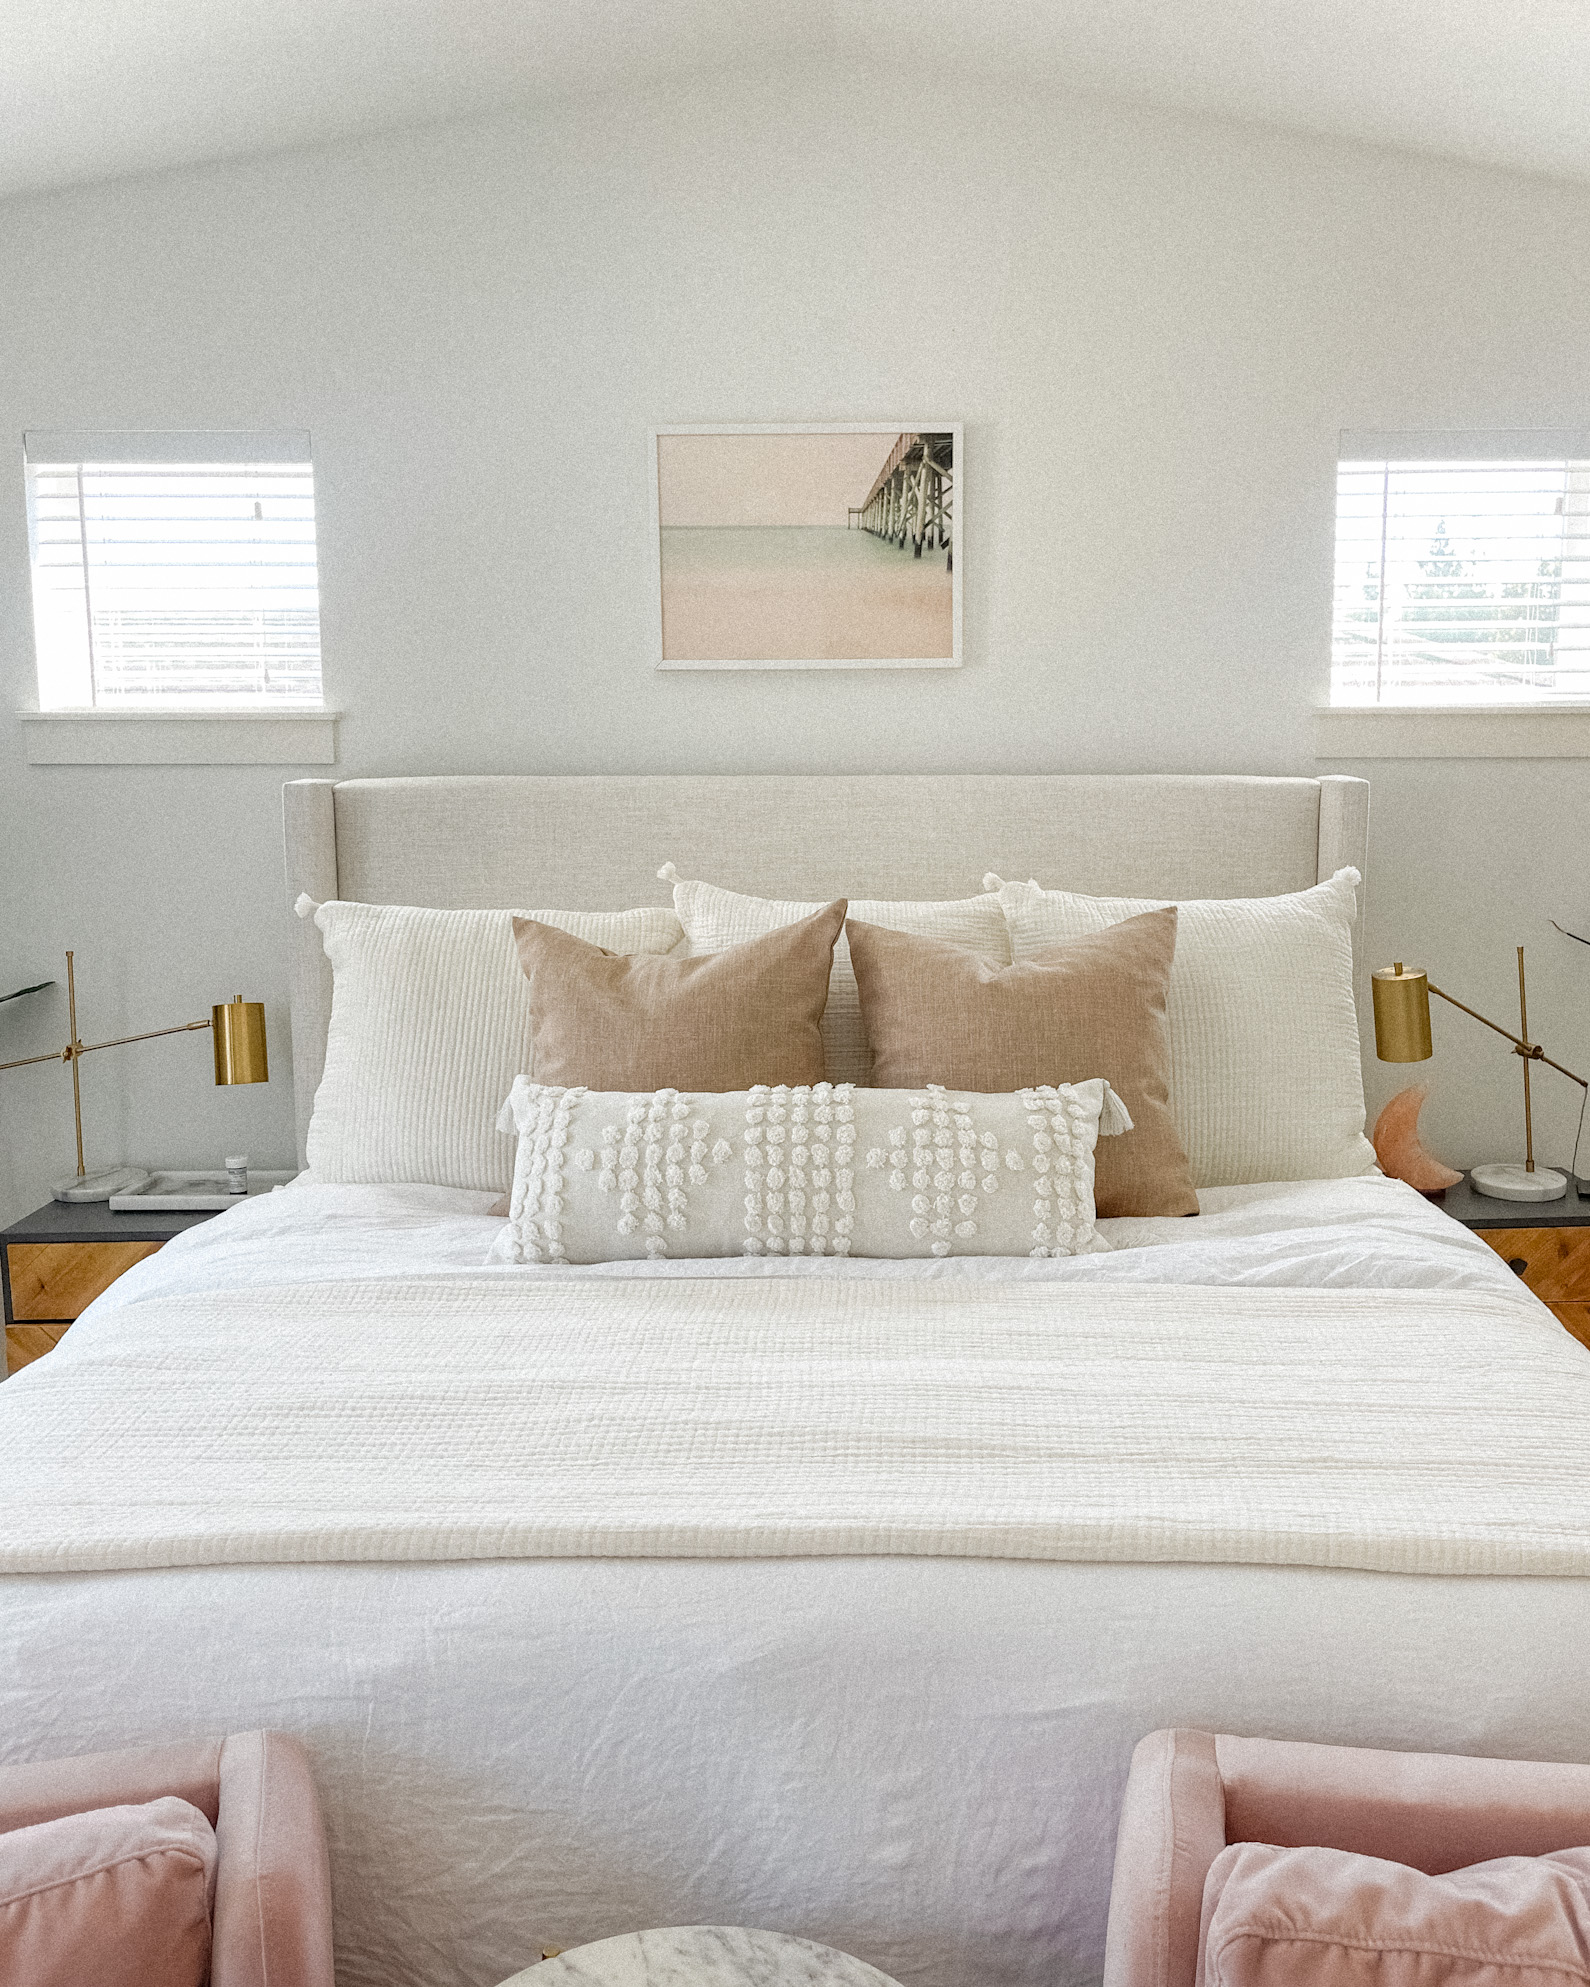 How To Arrange Pillows On A King Bed, How To Arrange Pillows On A King Size Bed